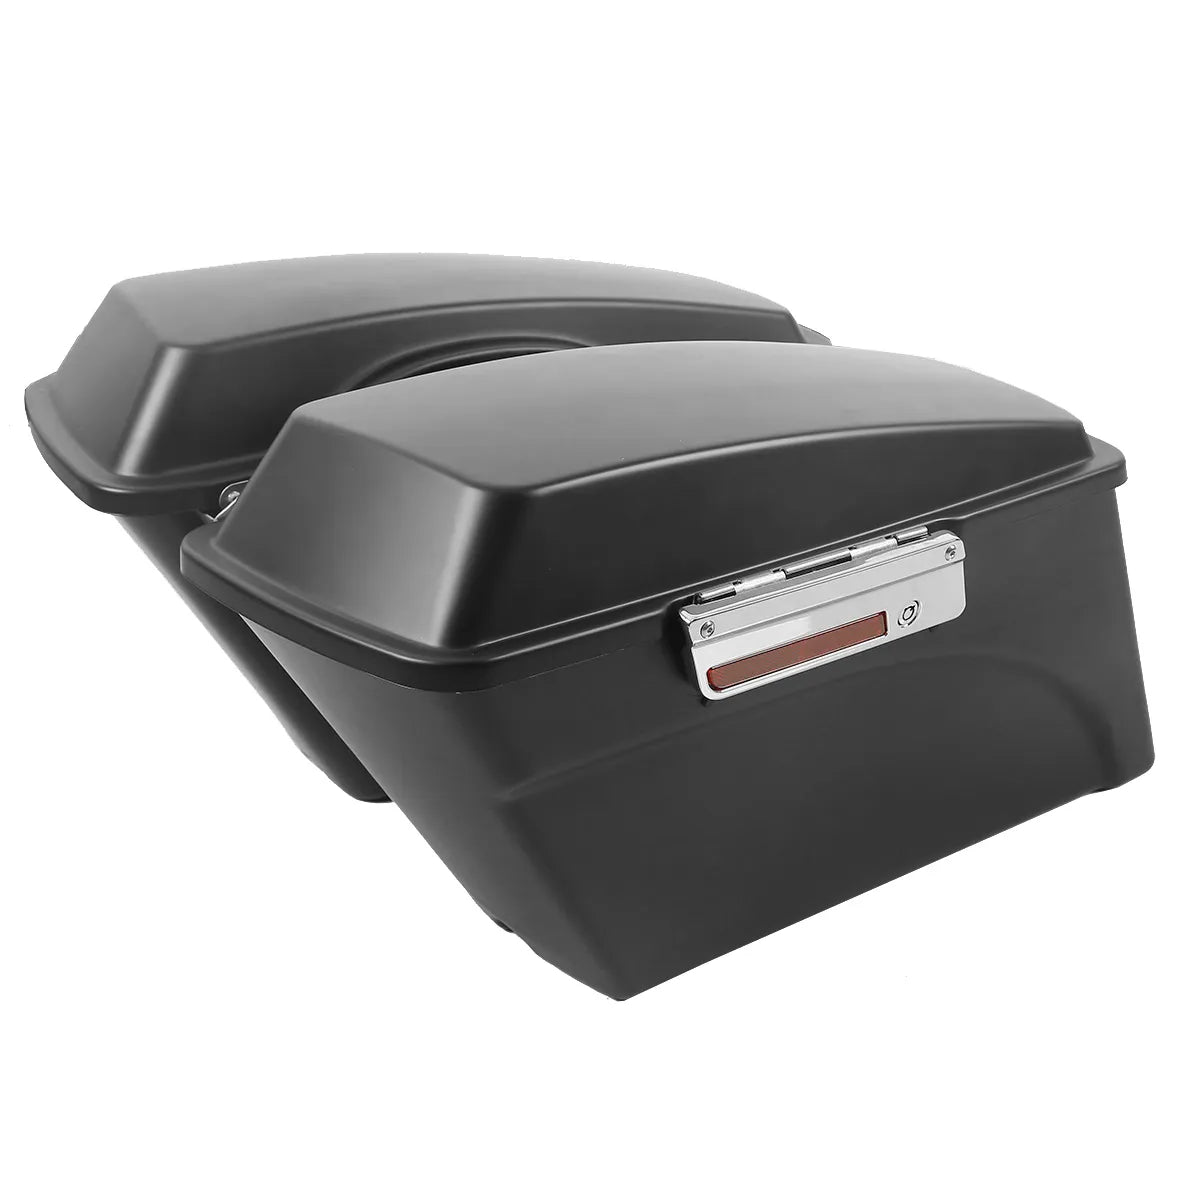 Voodoo Cycle House Saddlebags For Harley-Davidson Touring Models Road King Street Electra Glide 1994-2013